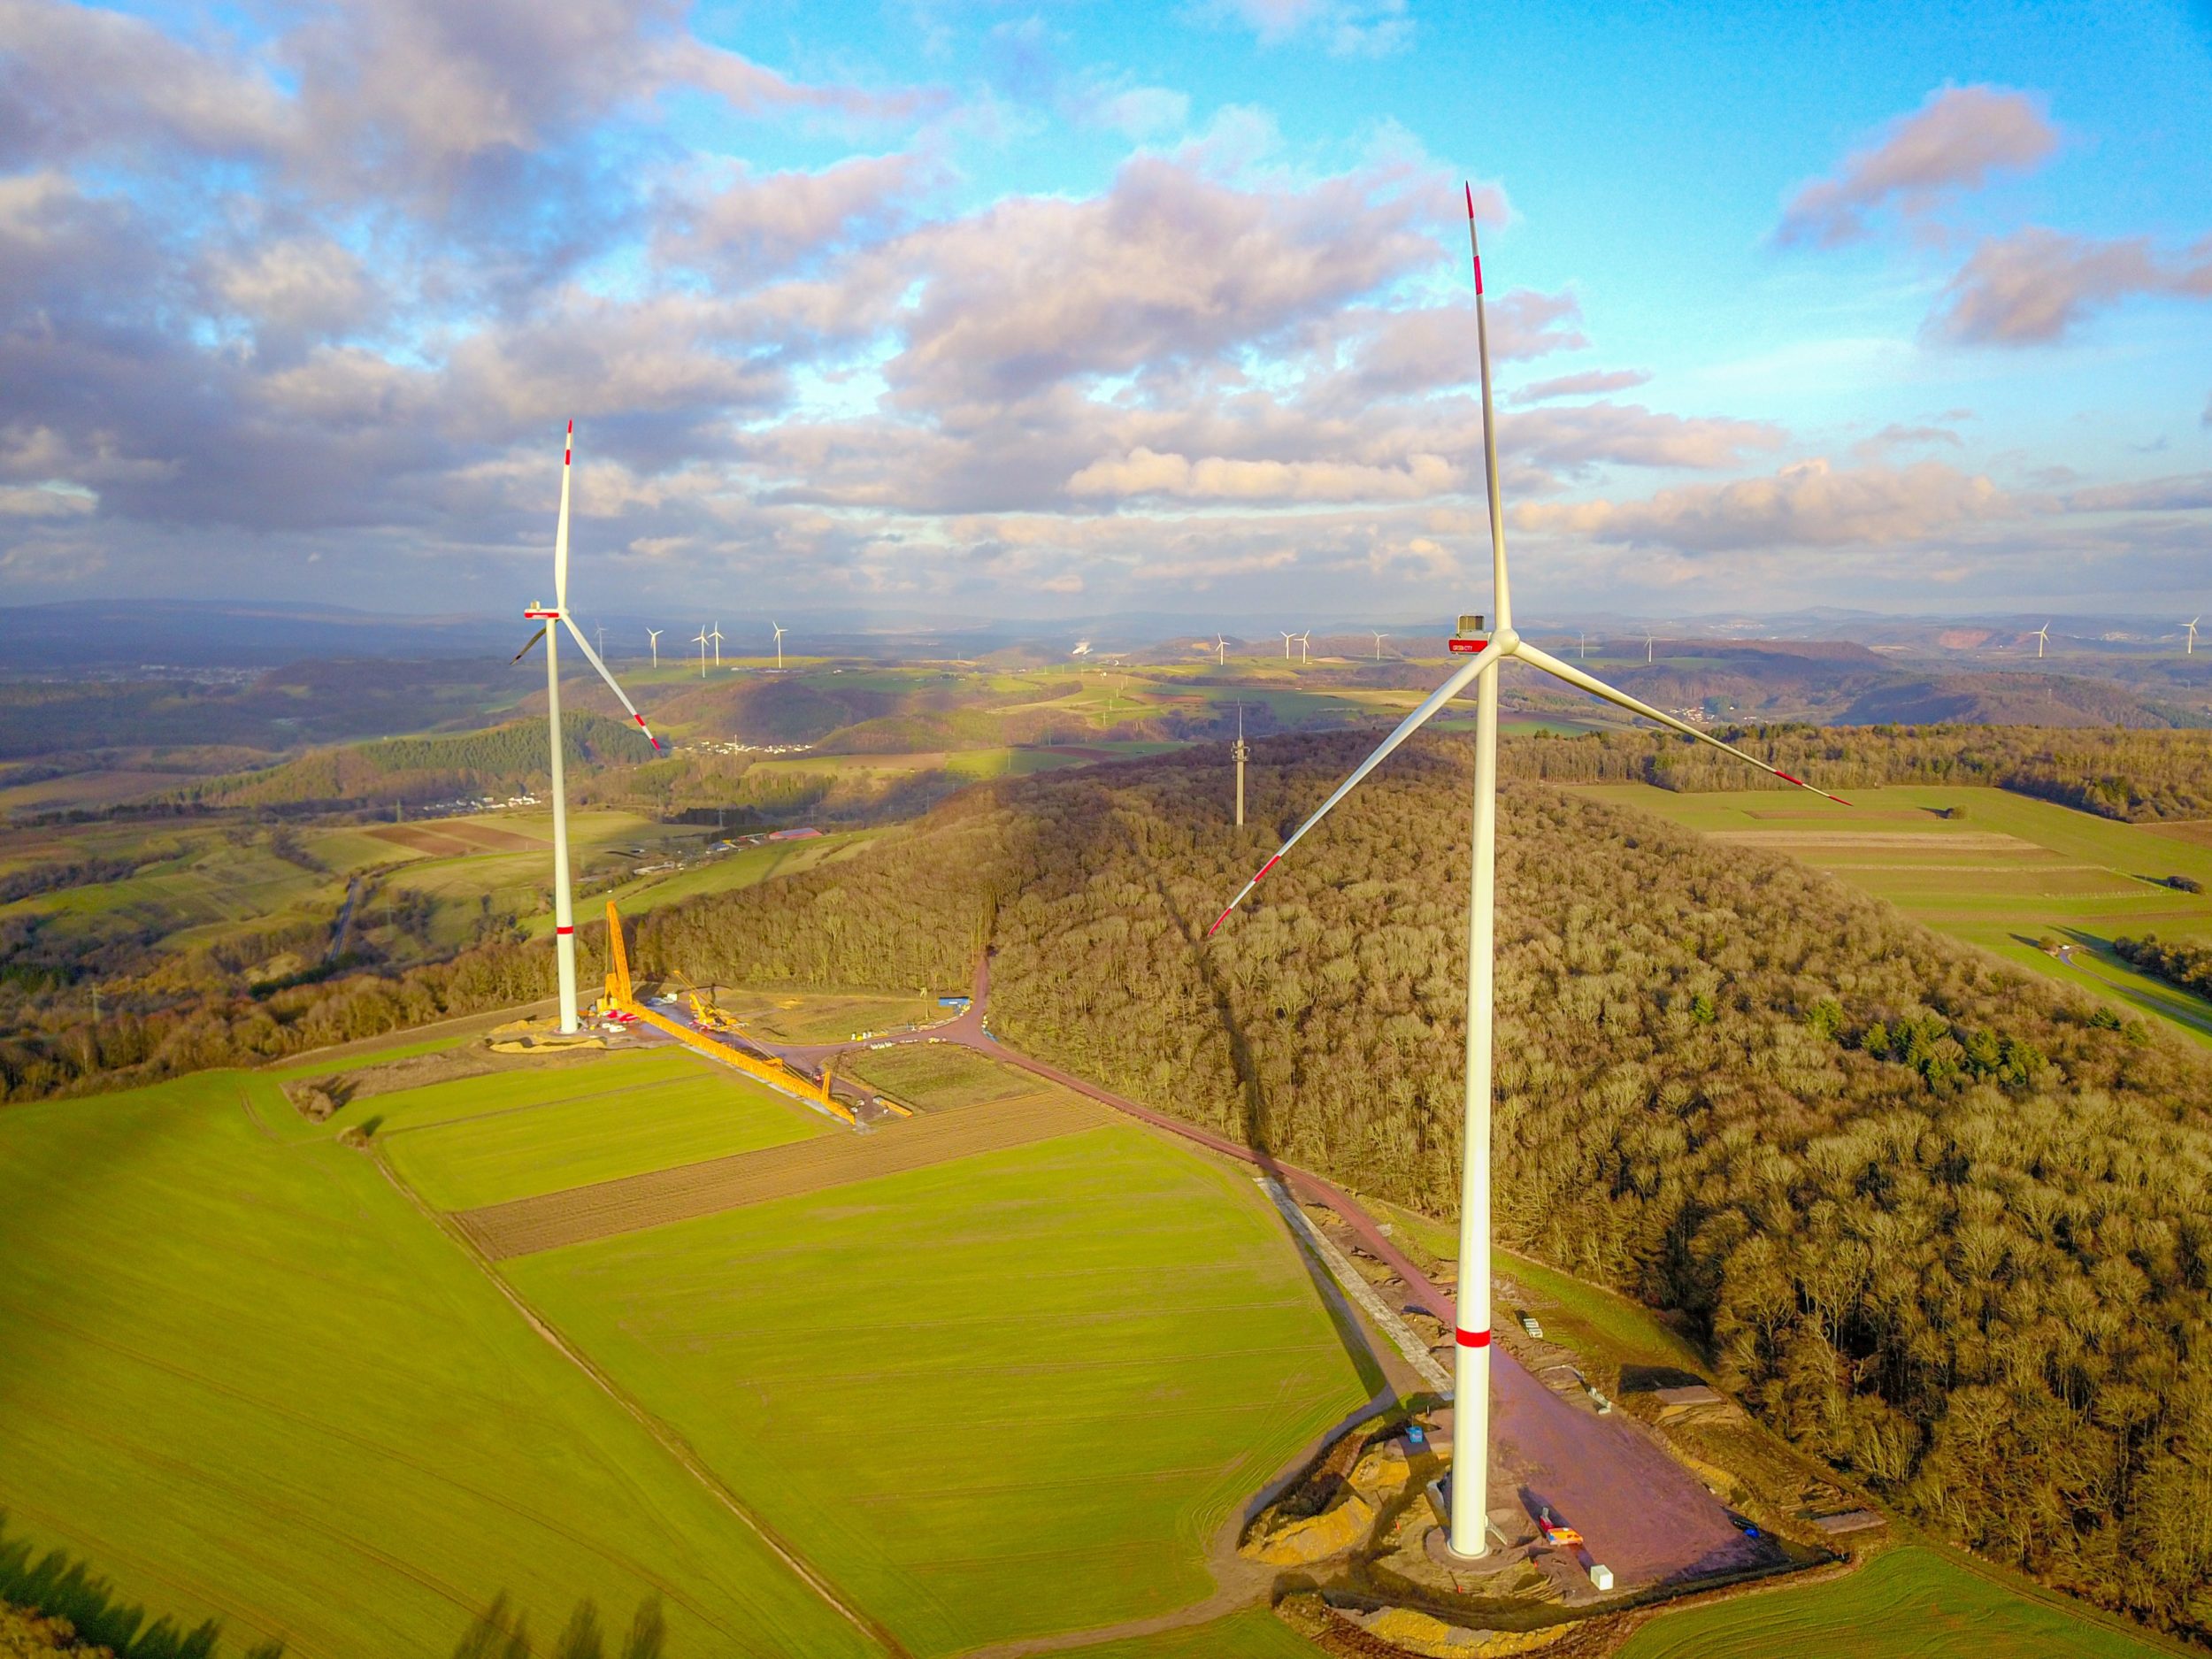 Picture of Qair's onshore wind farm in Merzig, Germany